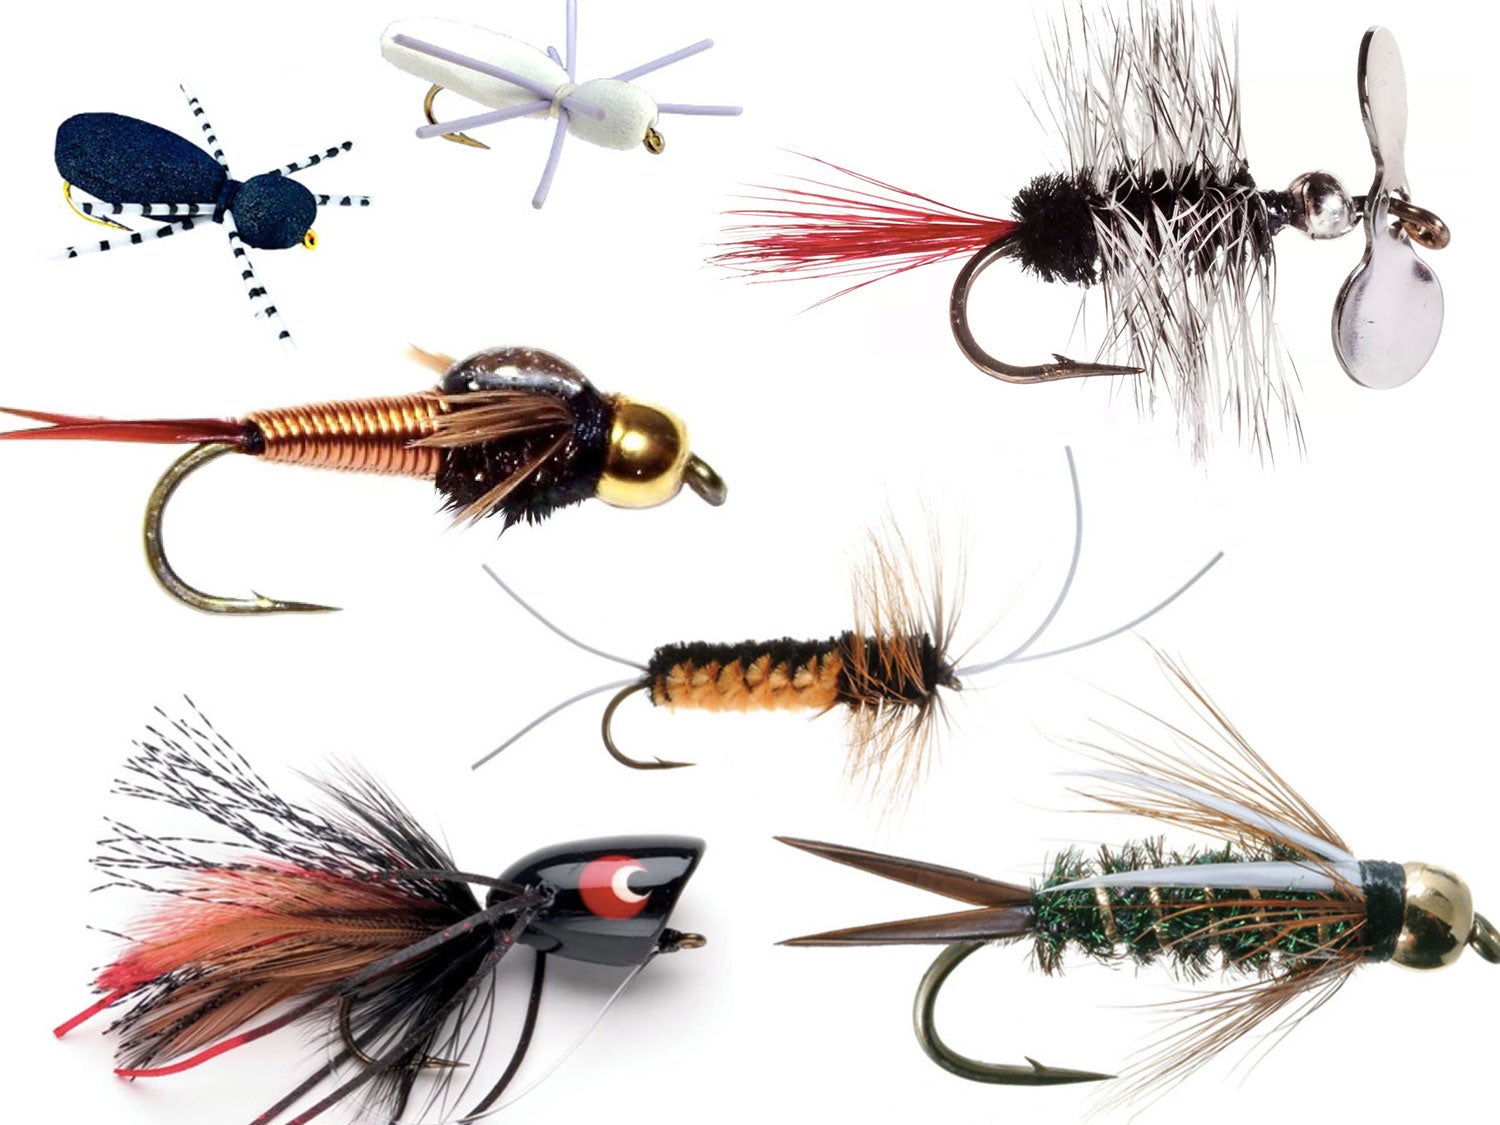 1 PANFISH TROUT BASS BREAM CRAPPIE BLUEGILL POPPER FLY FISHING WHITE CORK SPIDER 